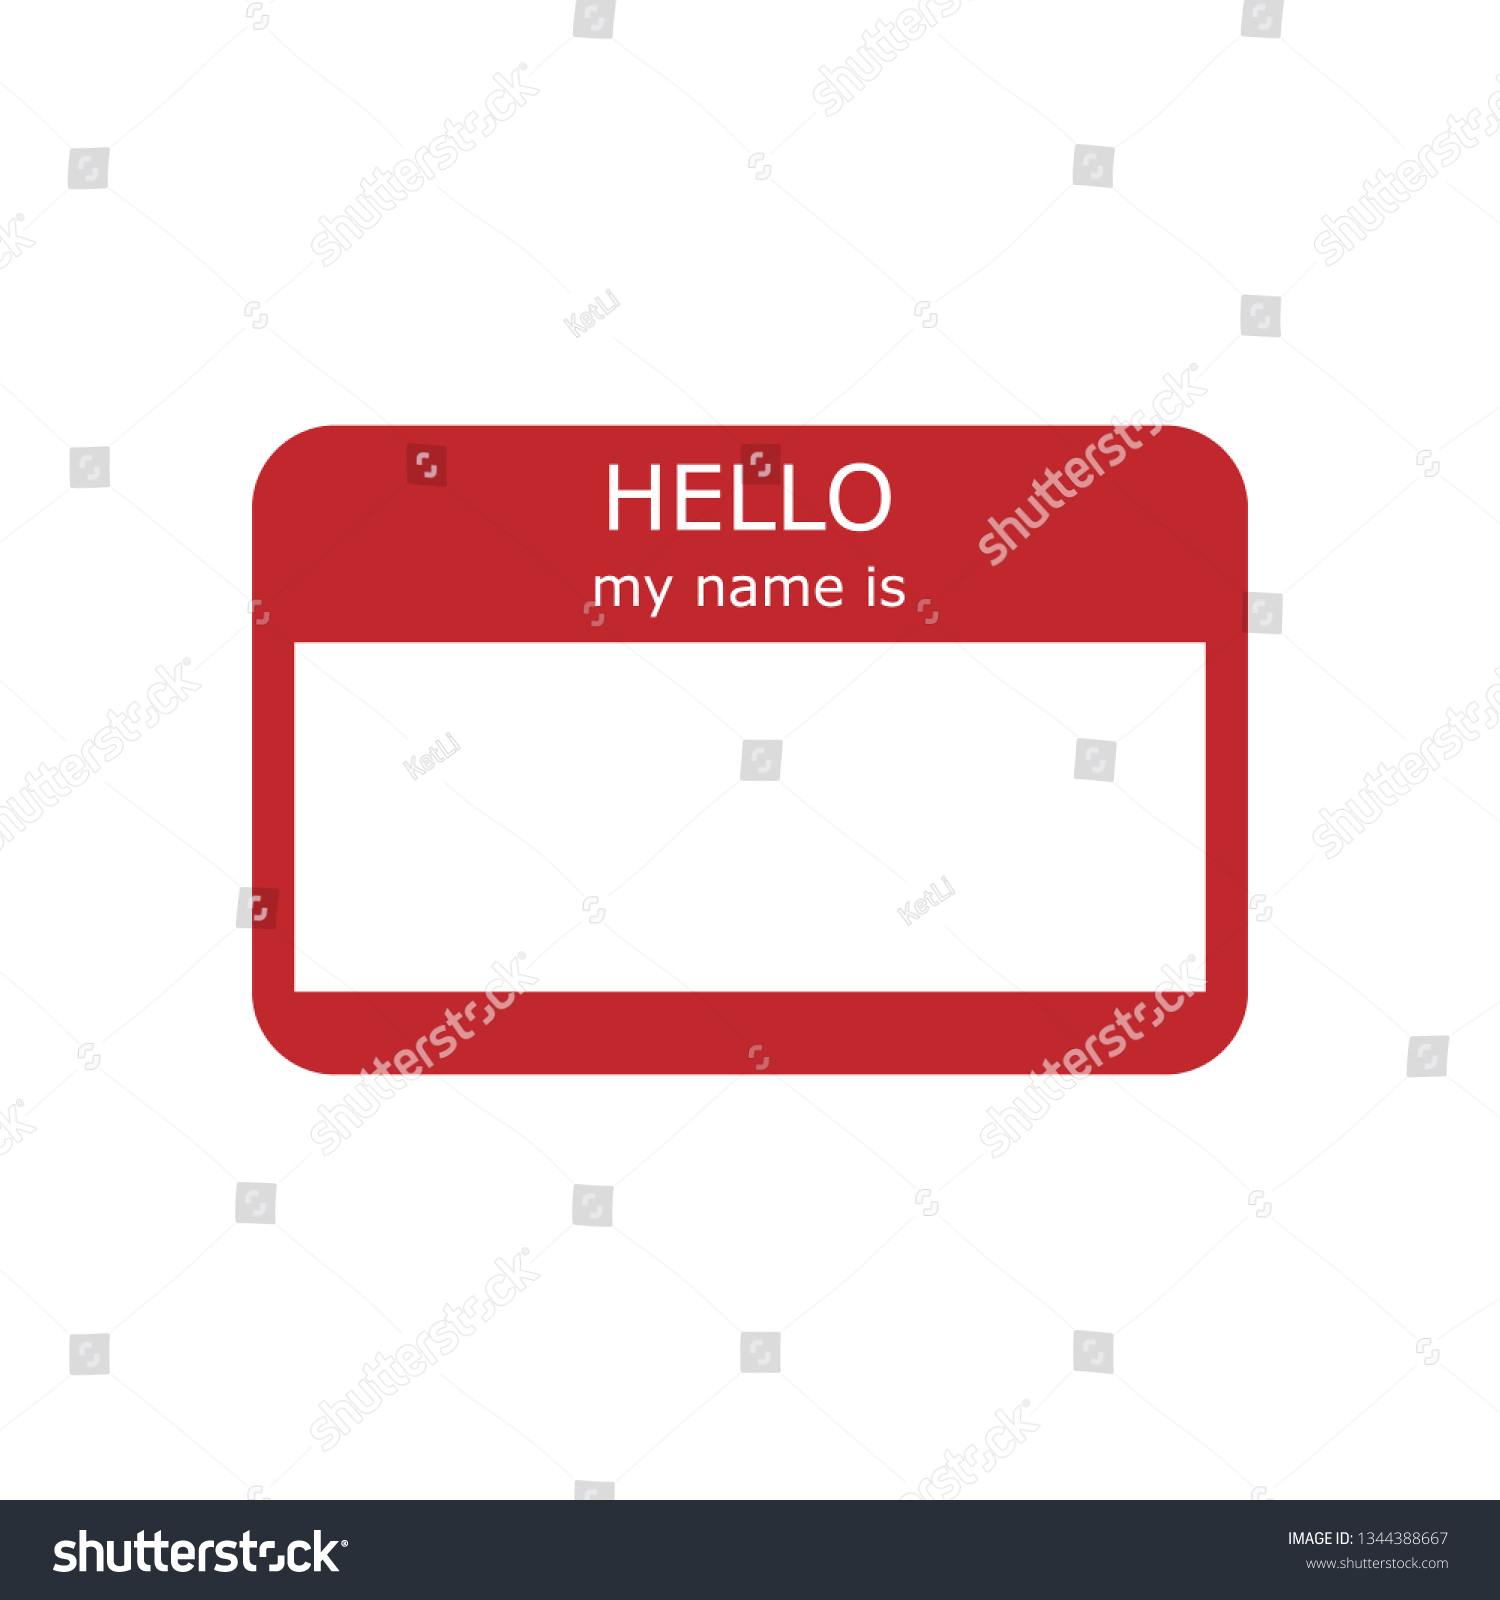 Hello My Name Introduction Red Flat Stock Vector Royalty Free 1344388667 Shutterstock